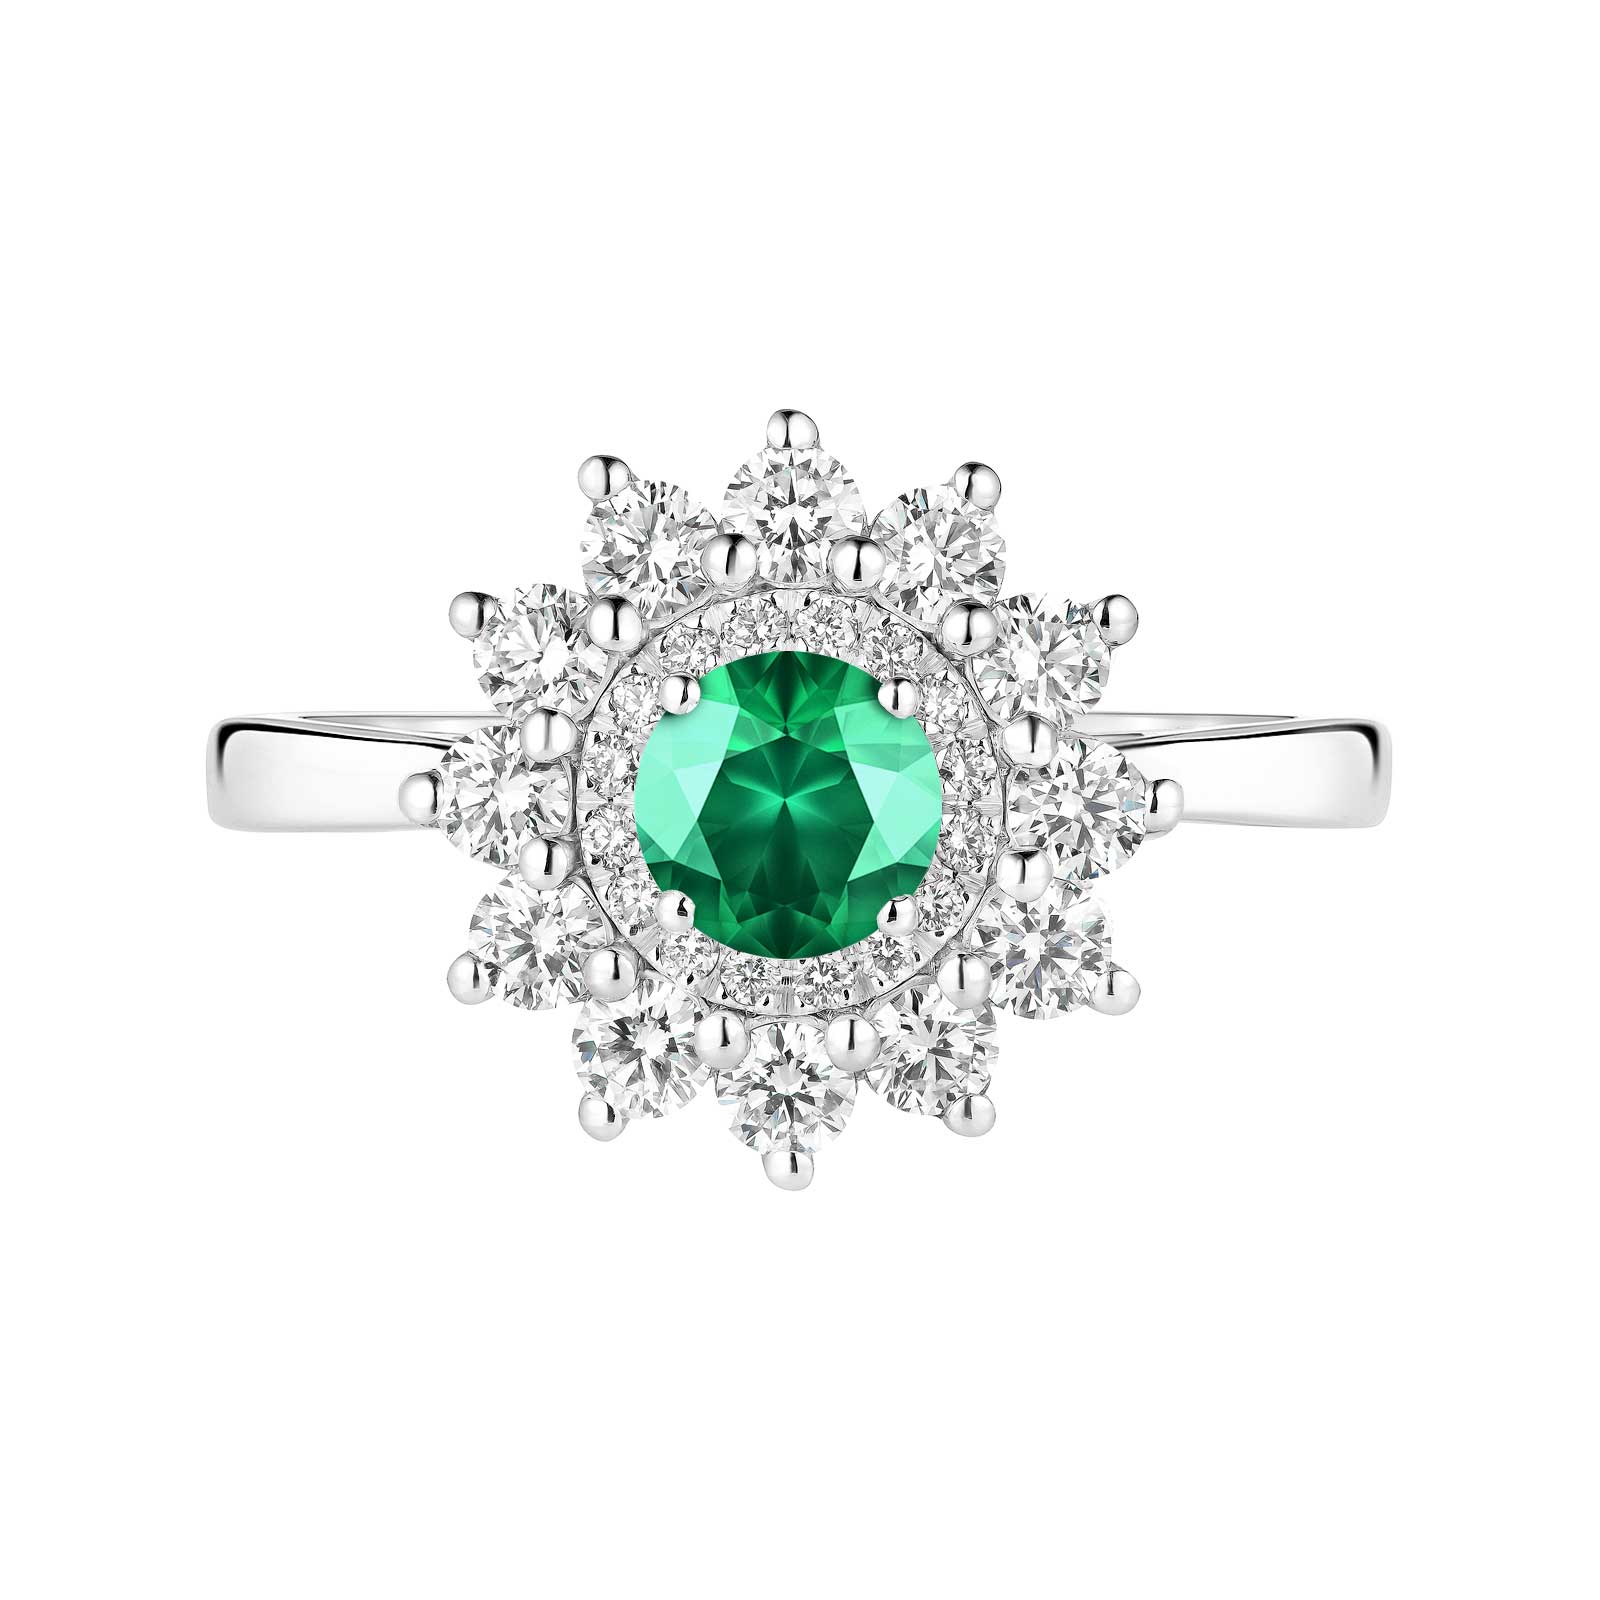 Ring White gold Emerald and diamonds Lefkos 5 mm 1